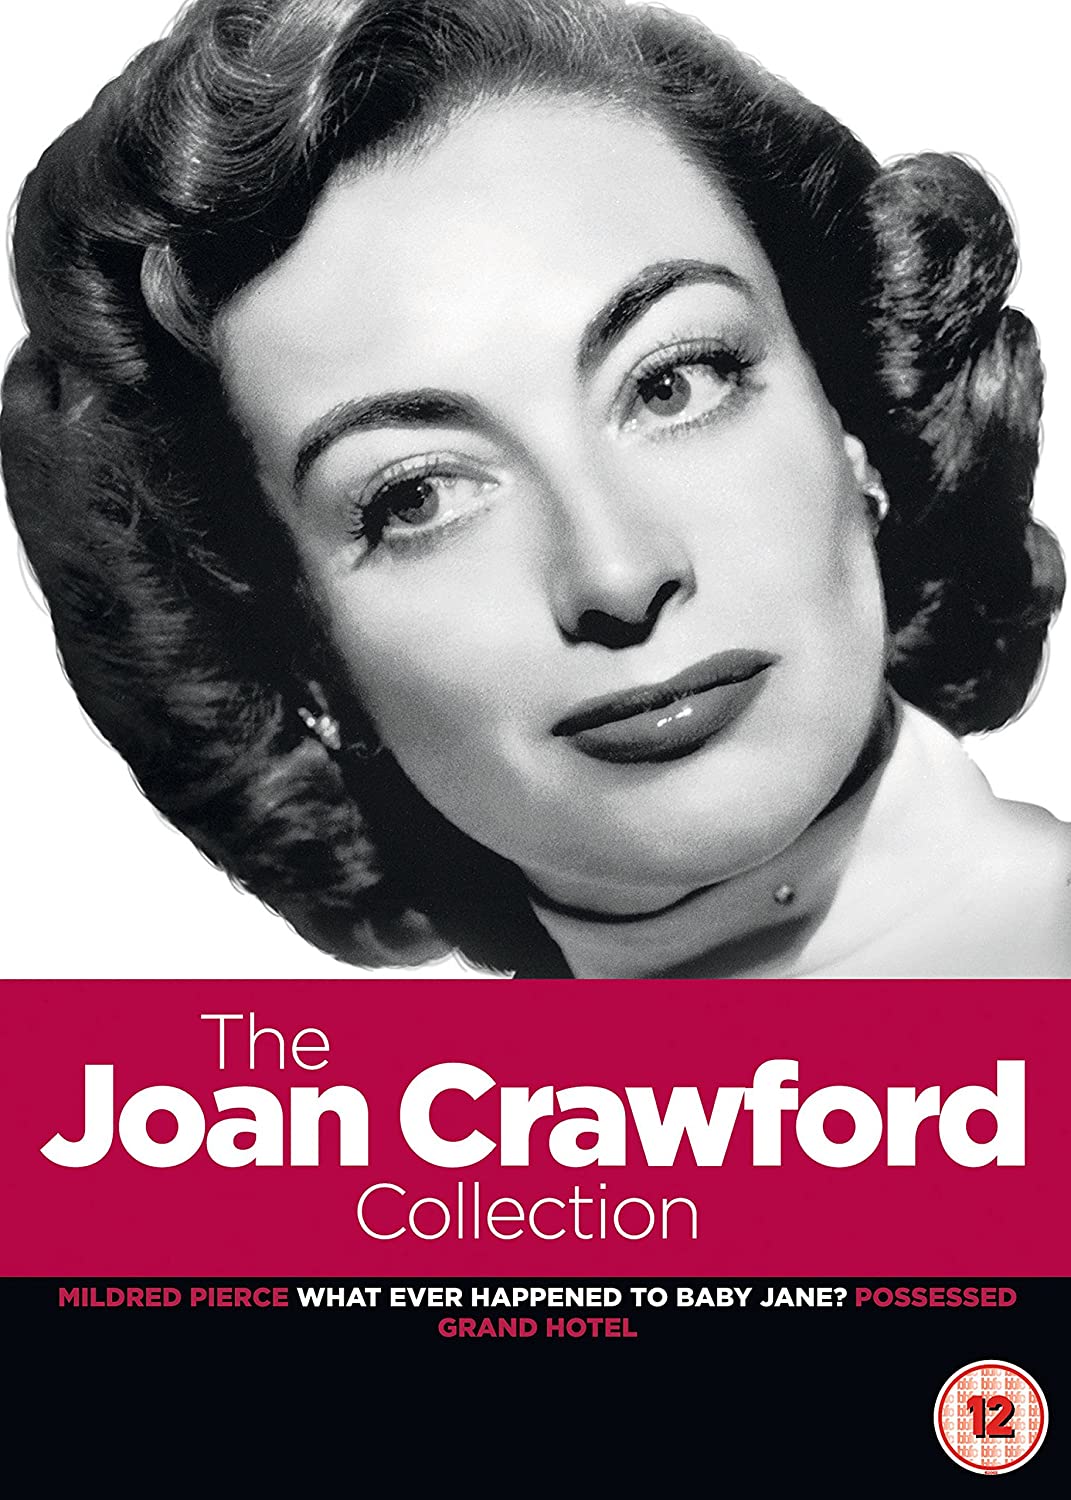 The Joan Crawford Collection : What Ever Happened To Baby Jane? / Mildred Pierce / Possessed / Grand Hotel [1945] [DVD]